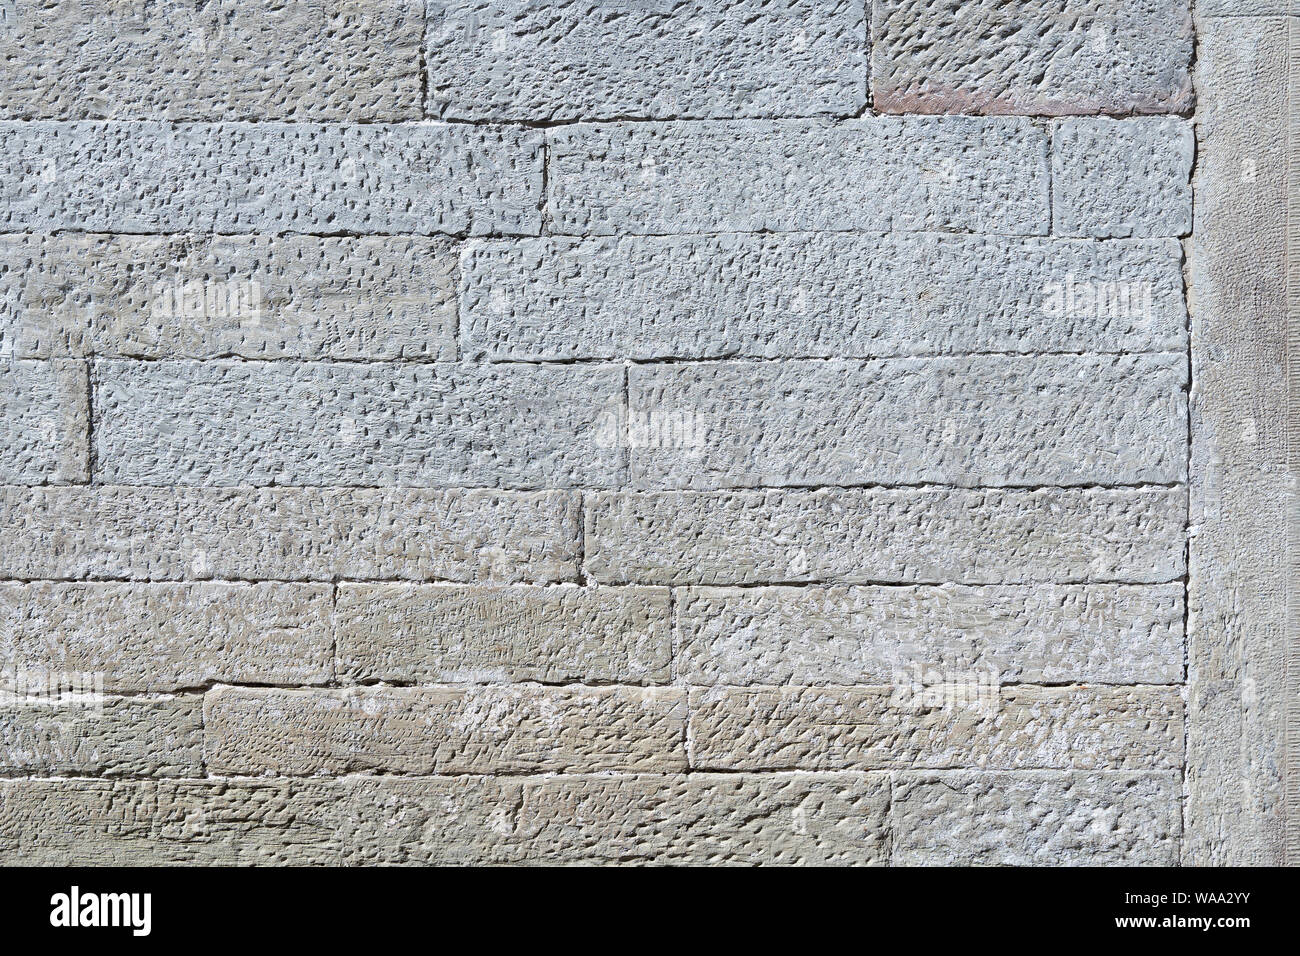 Old stone wall of square elongated stones Stock Photo